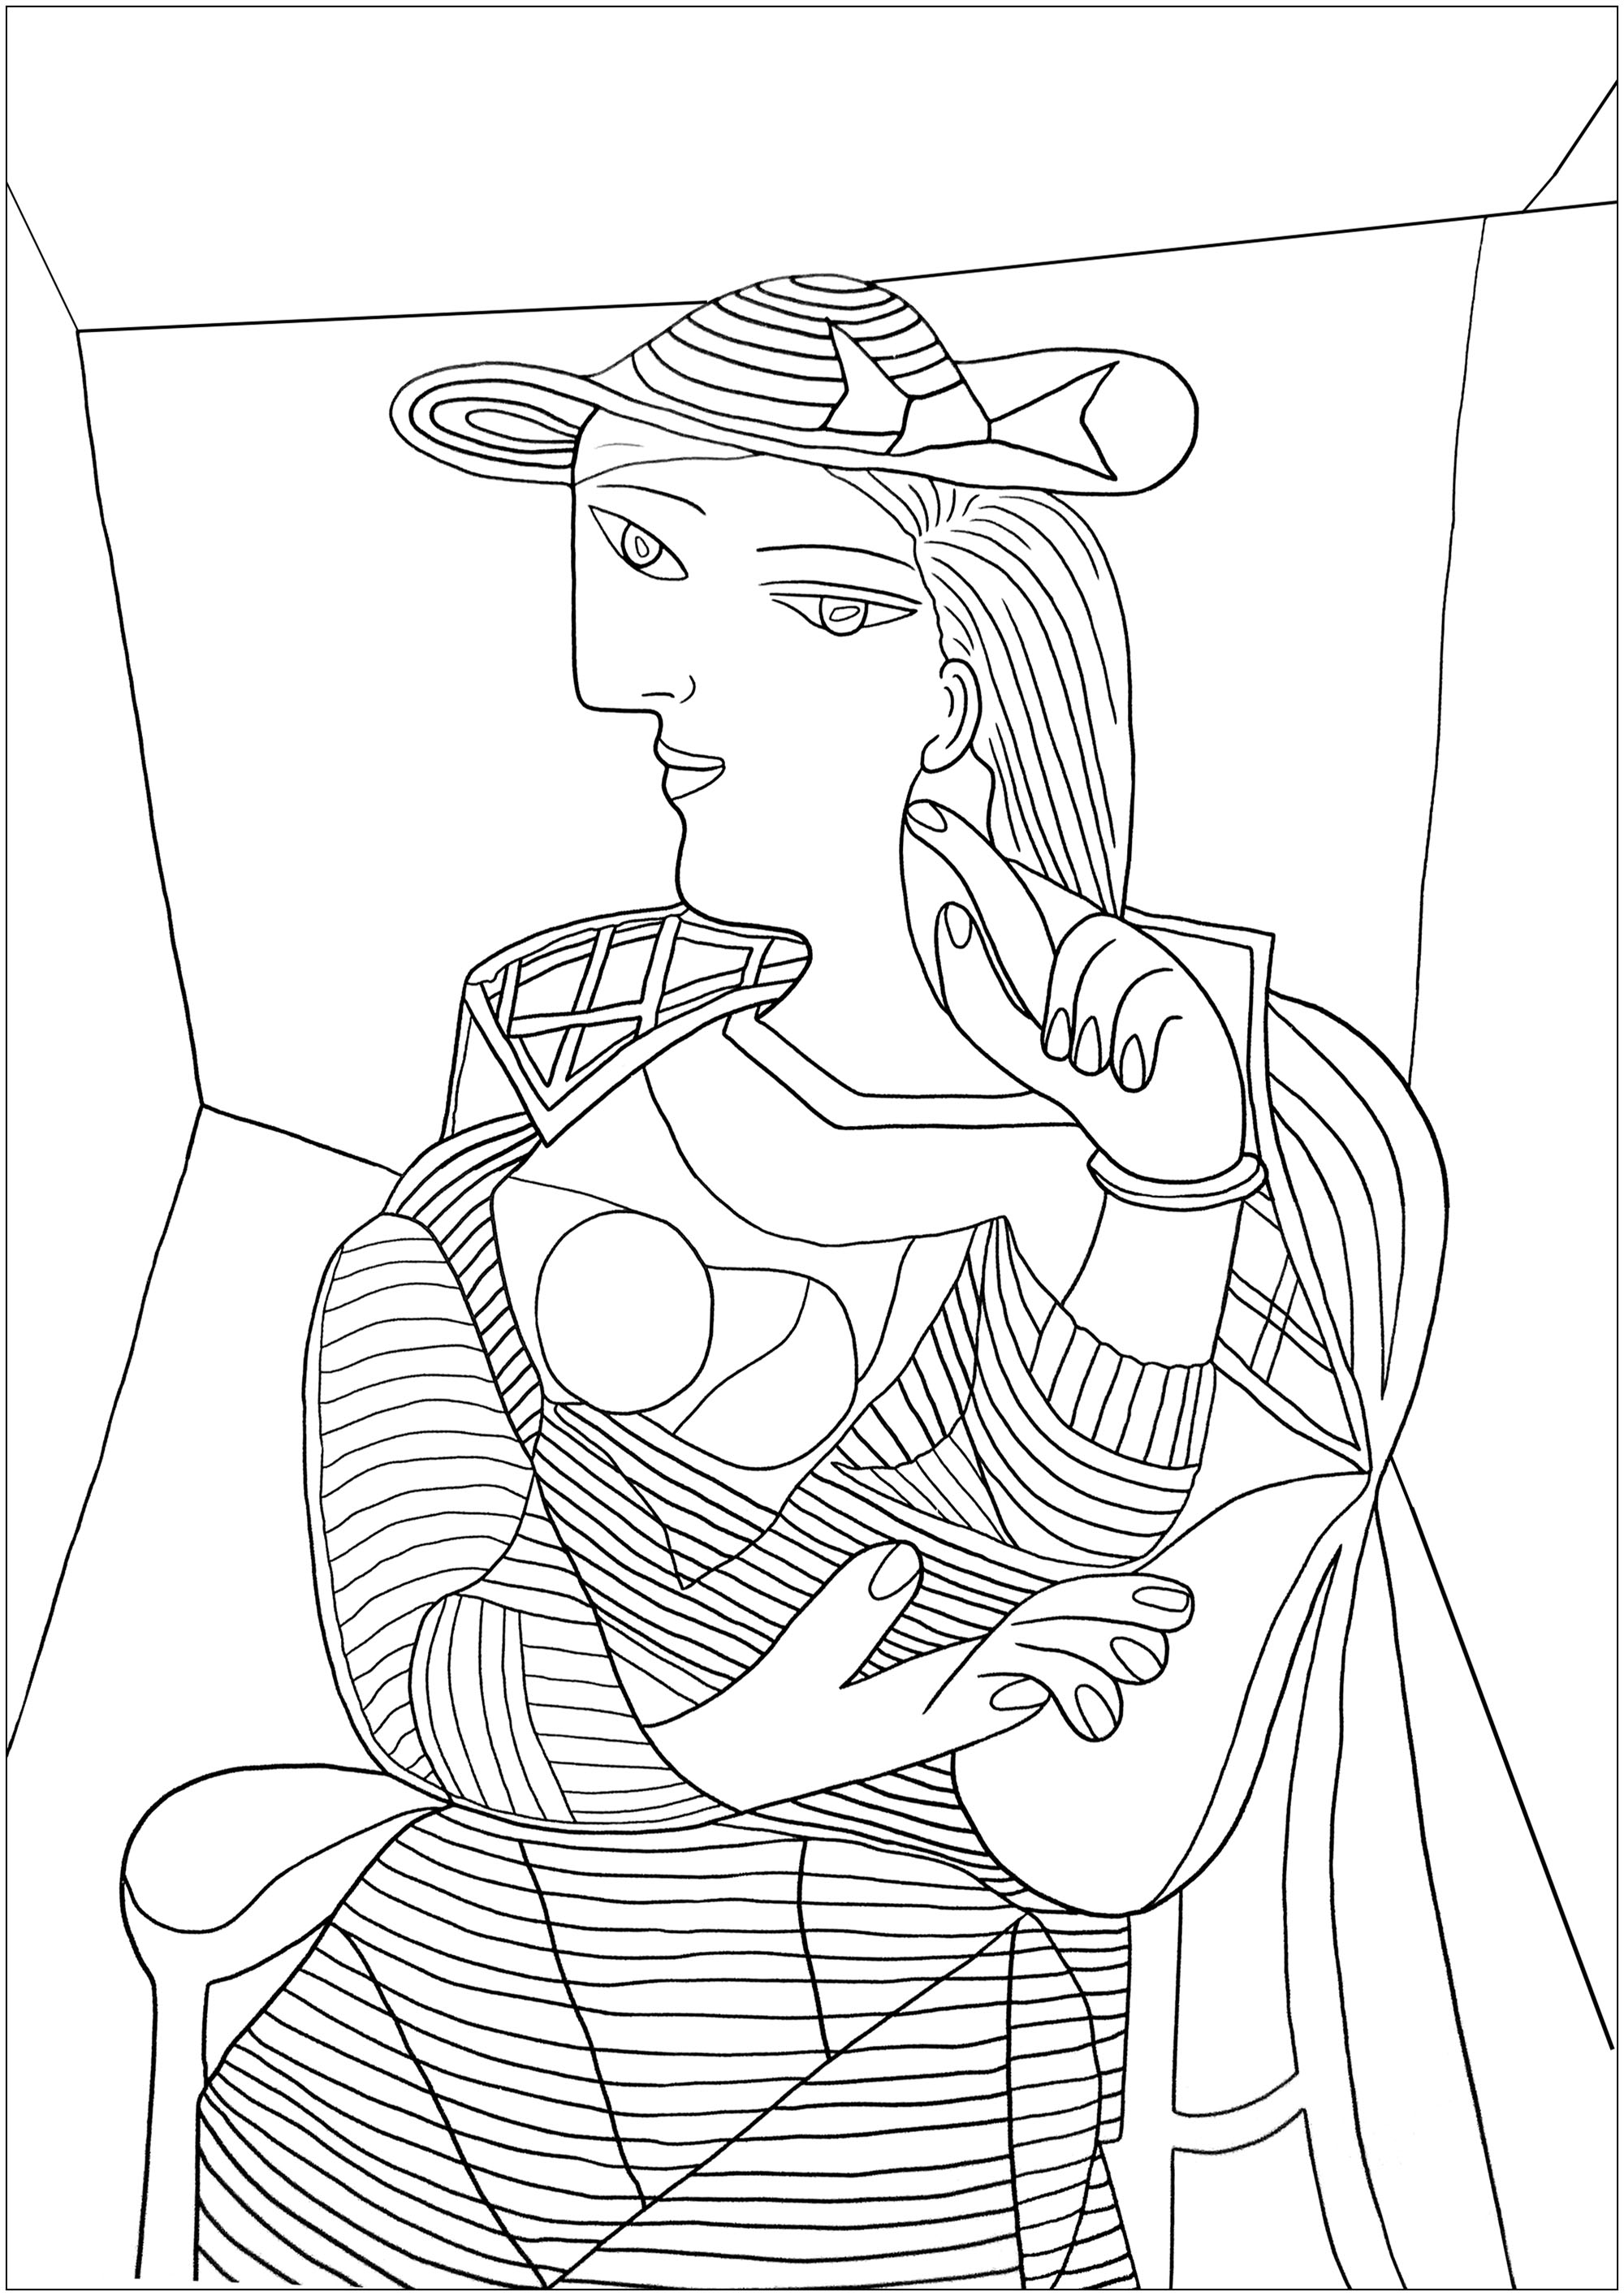 Coloring page created from Portrait of Marie Therese Walter by Pablo Picasso